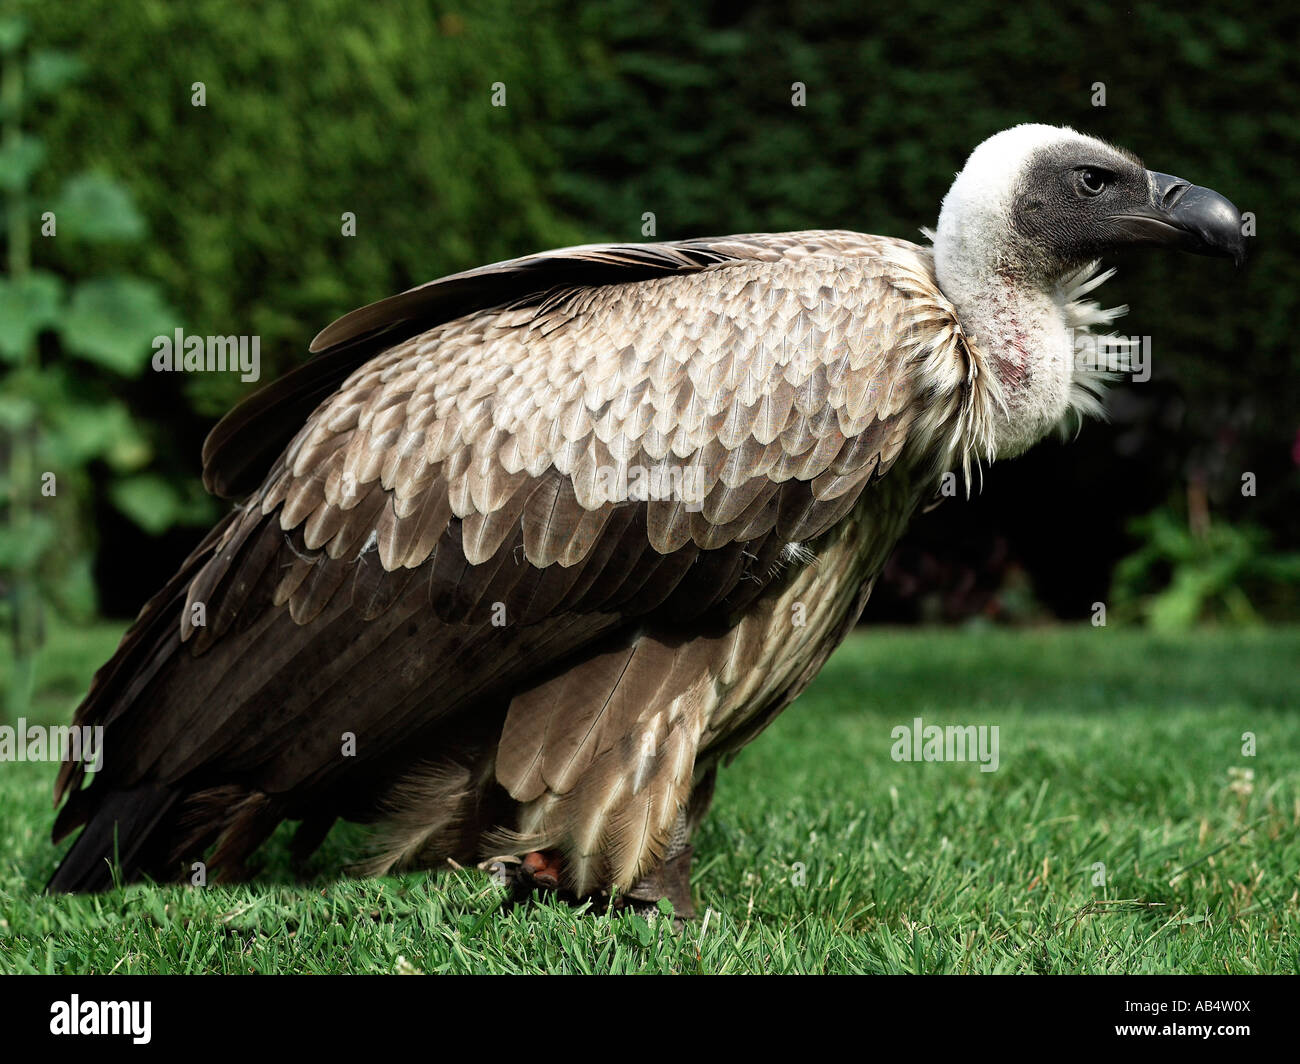 A vulture sitting on some grass Stock Photo - Alamy